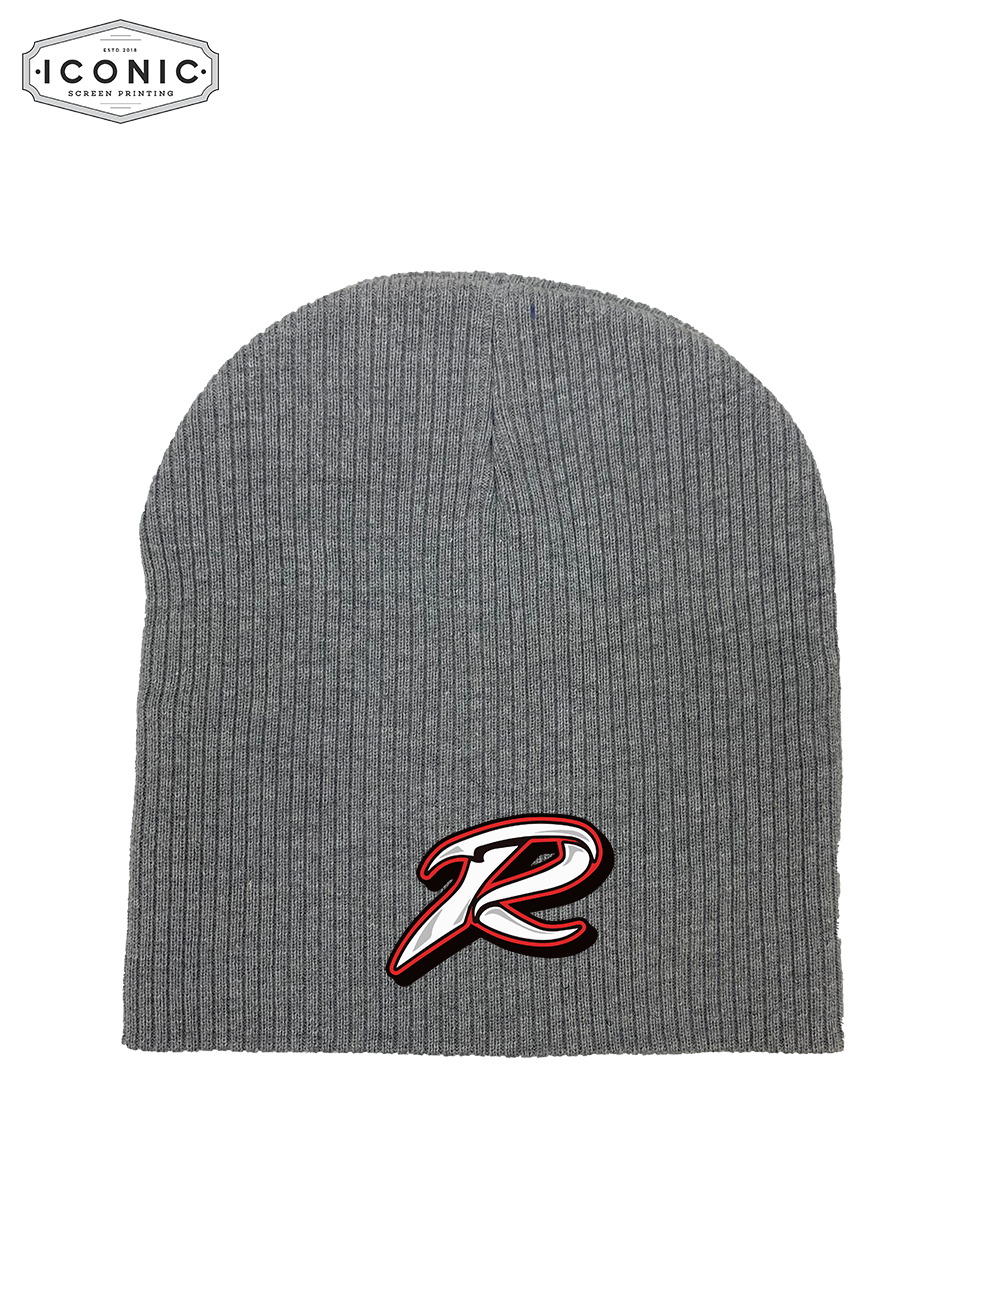 AWV R - 8" Ribbed Knit Beanie - Clearance